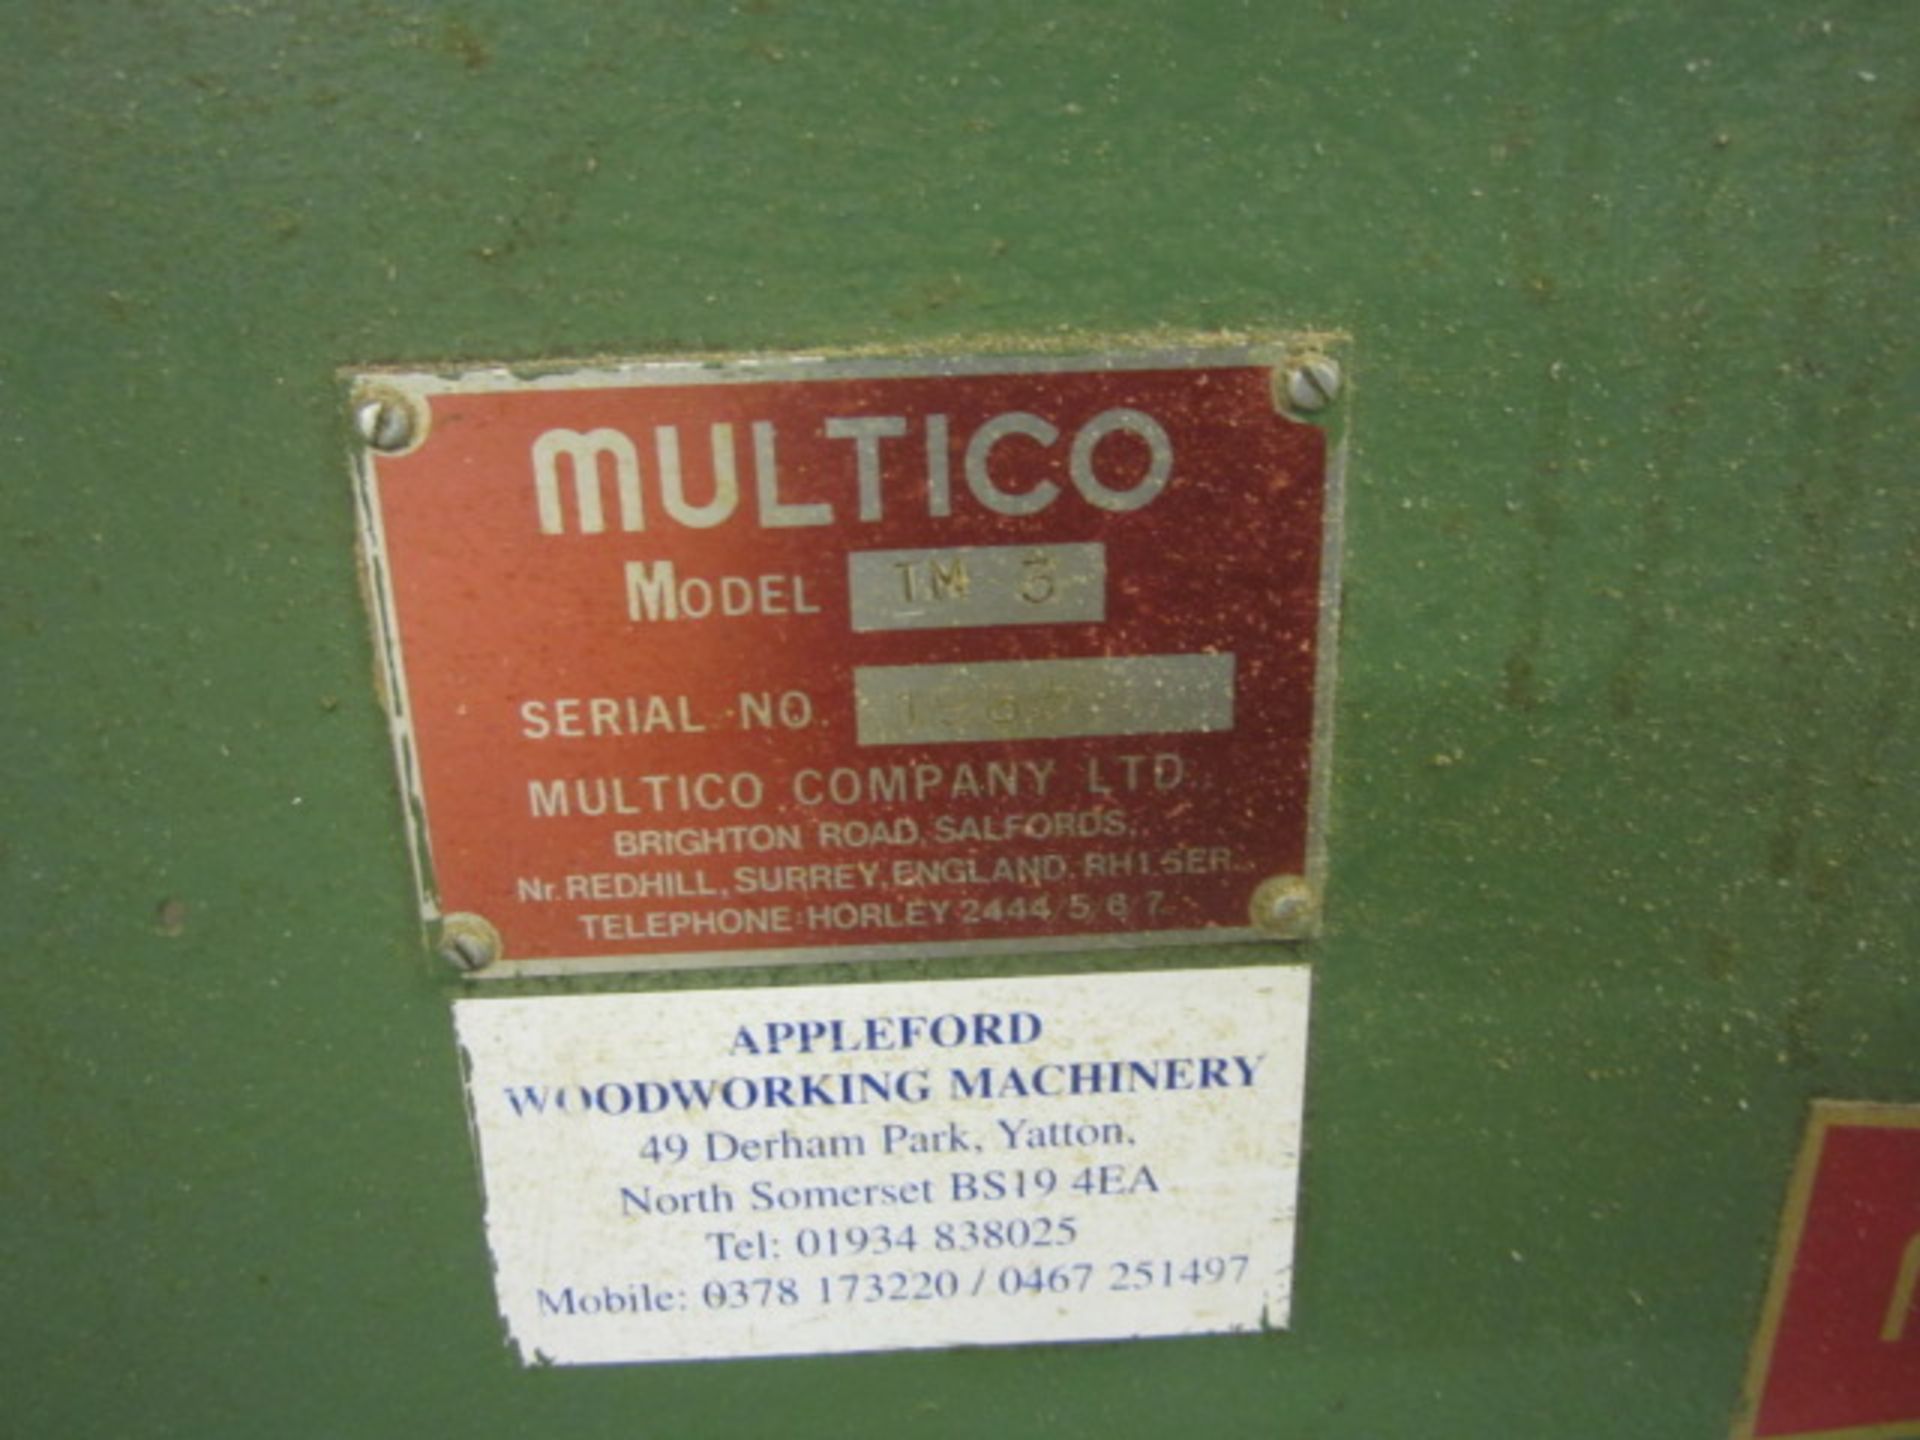 Multico single ended tenoner, model TM3, serial no: 1983, Driv Loc electronic DC injection - Image 5 of 5